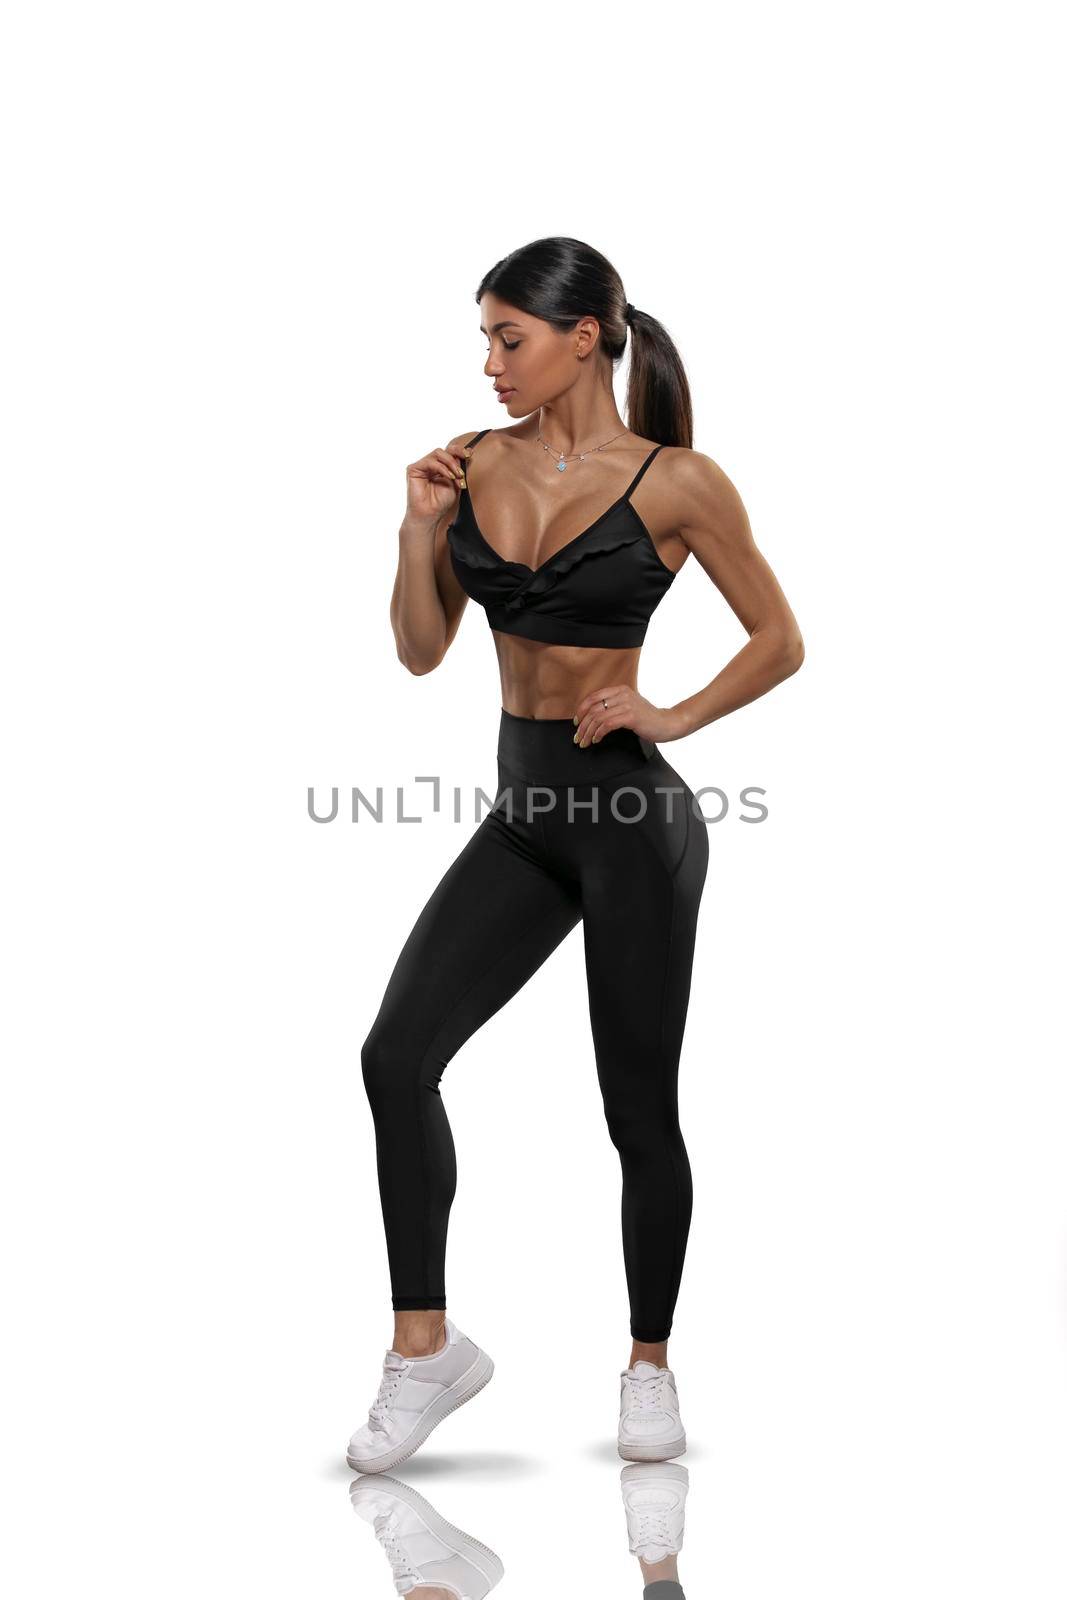 girl in black leggings and a top on a white background by but_photo